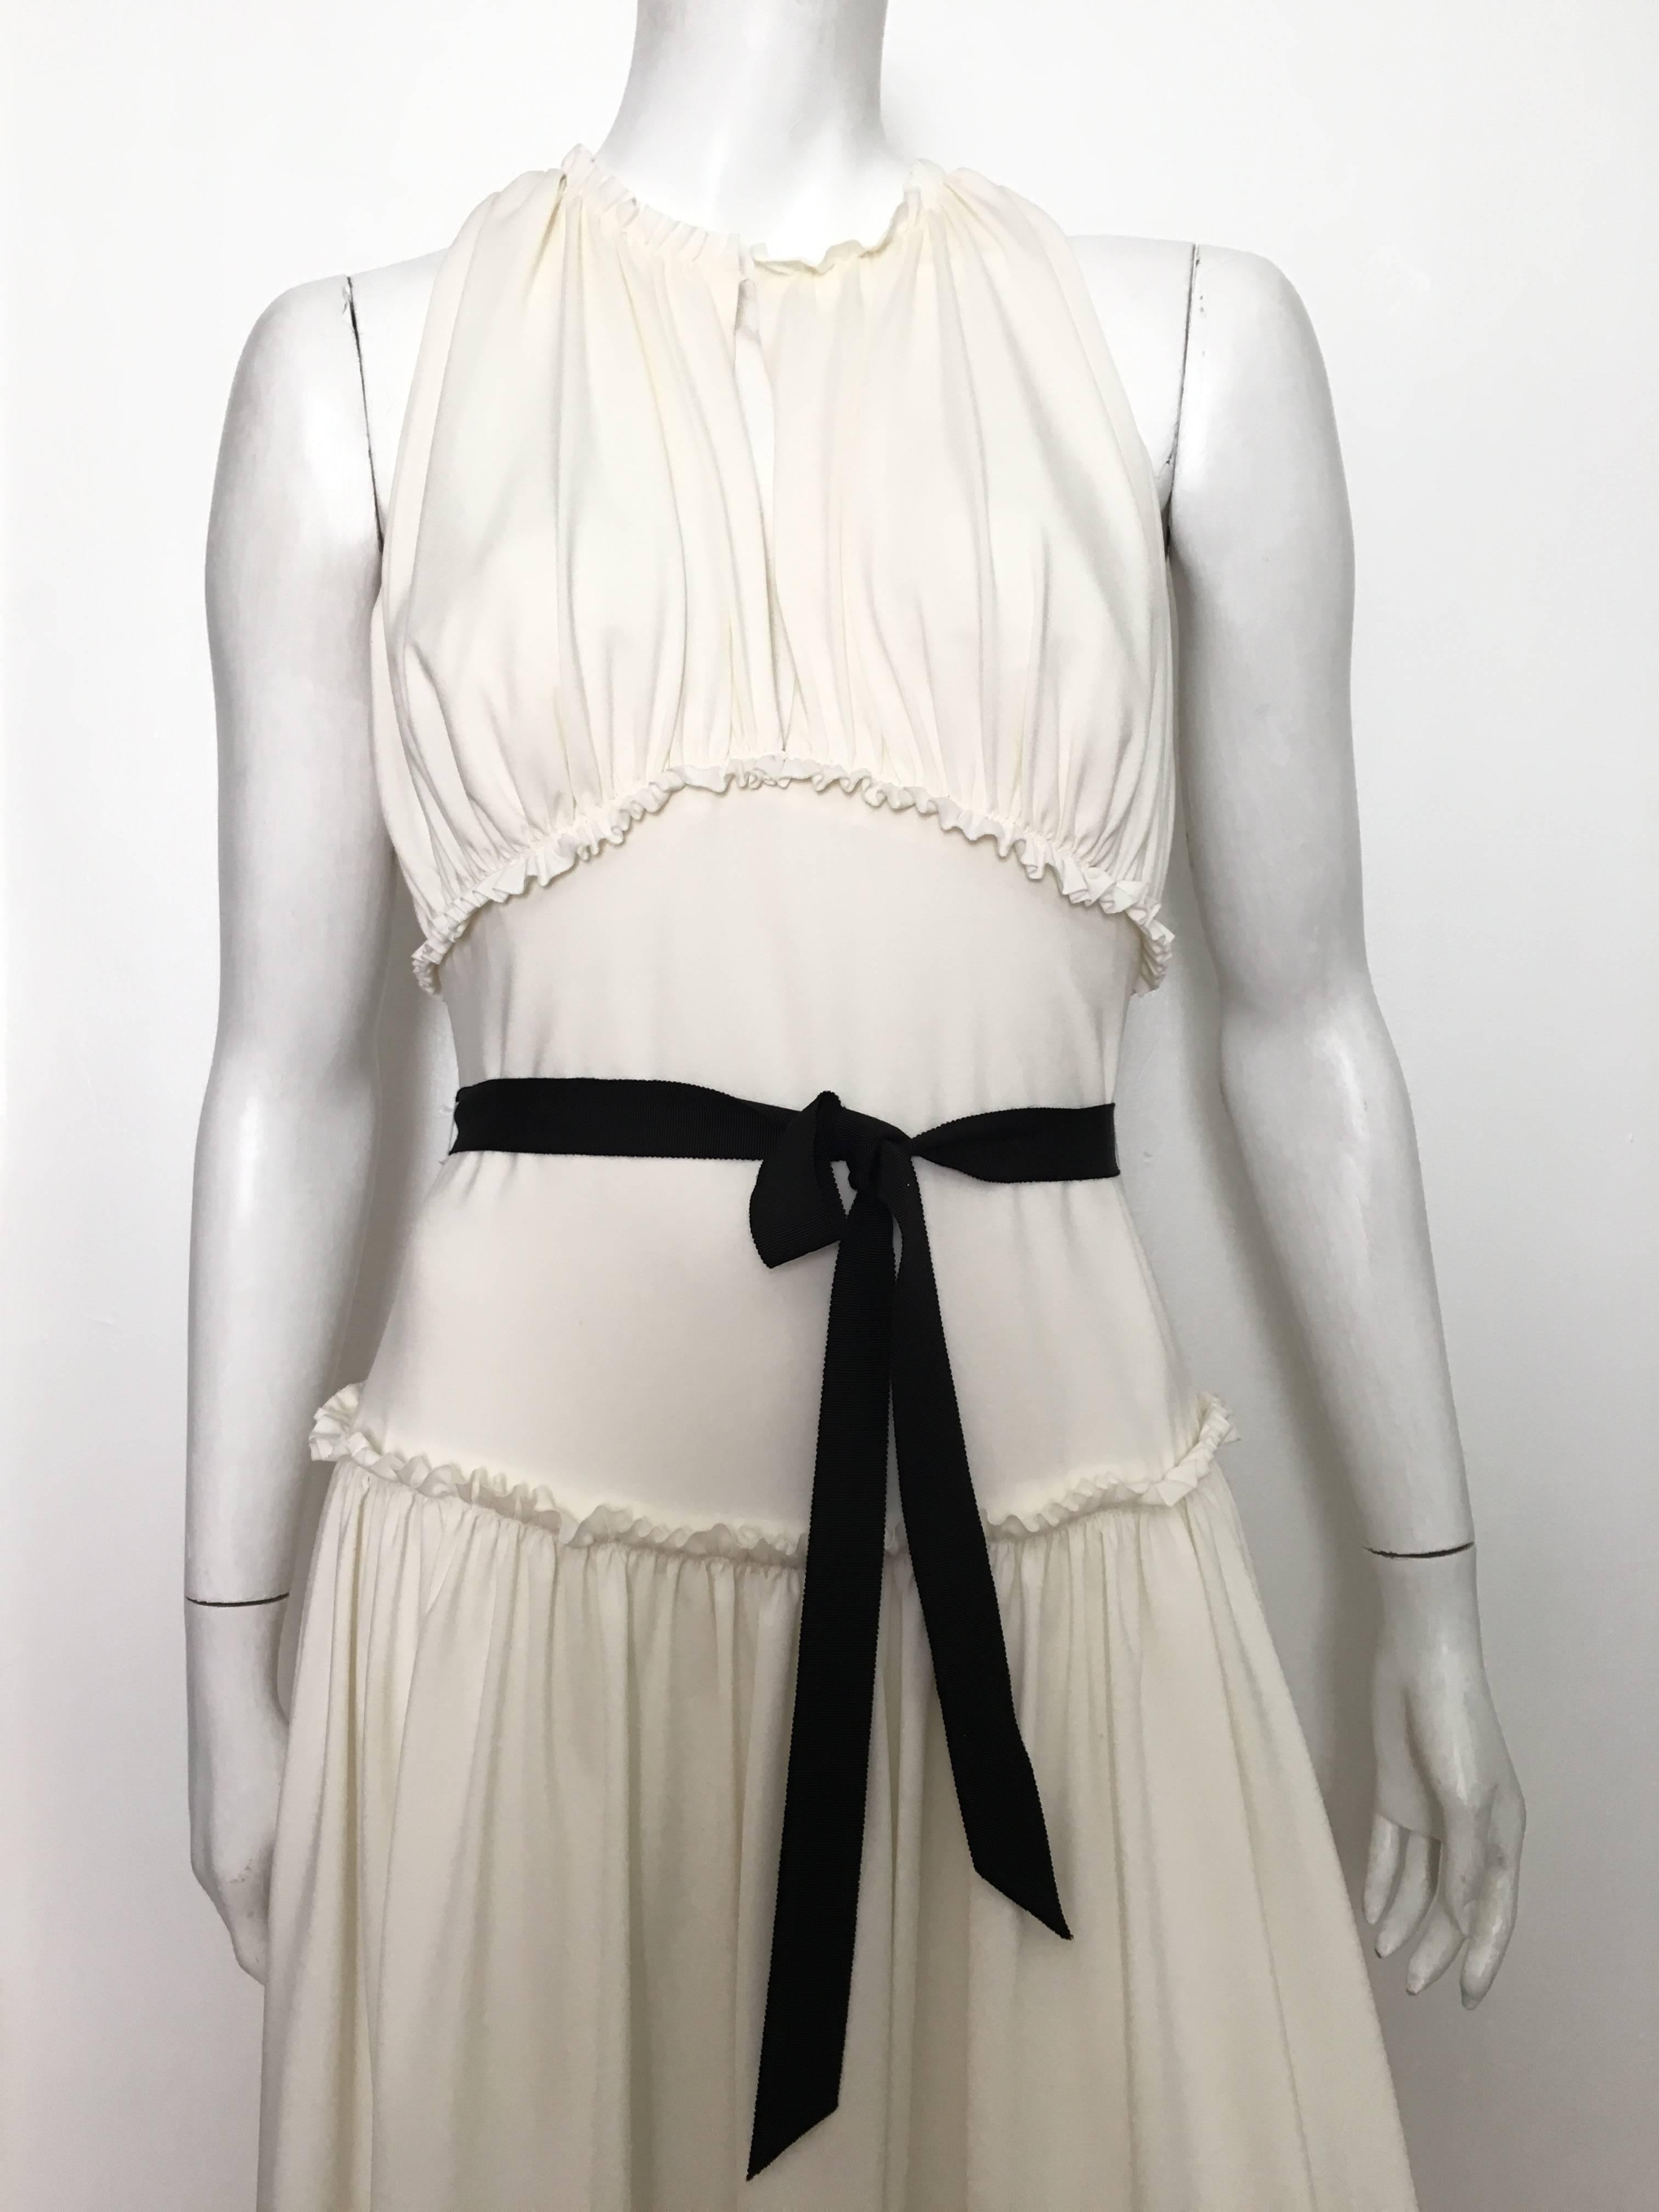 Vera Wang 1990s white jersey sleeveless dress with tie ribbon at waist is a size 10 / 44 but fits like a modern USA size 8.  Ladies please pull out your measuring tape so you can properly measure your bust, waist & hips to make certain this will